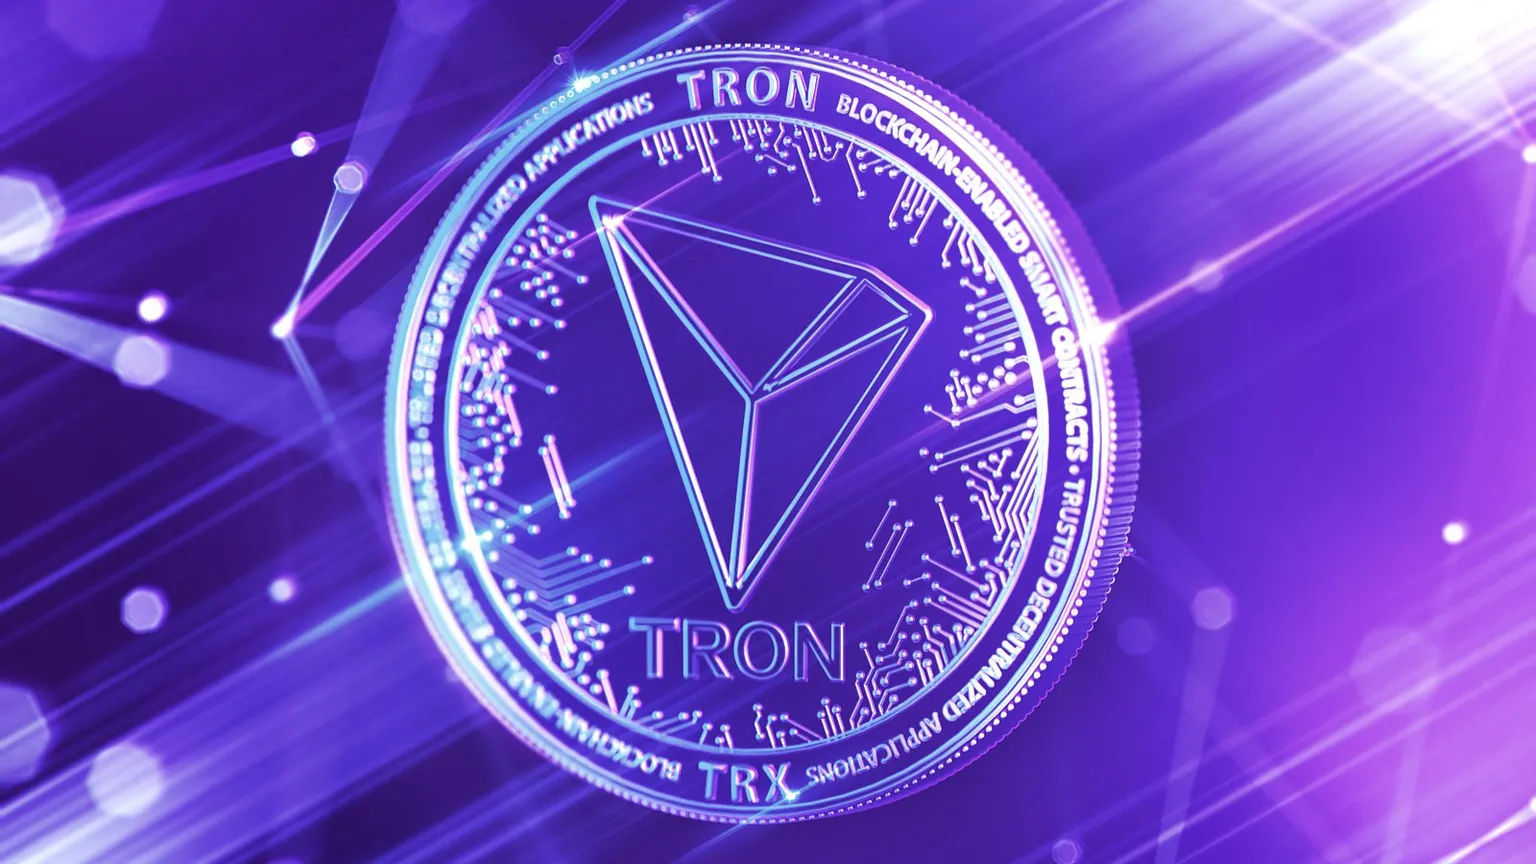 Tron is a decentralized operating system based on blockchain and the TRX cryptocurrency (Image: Shutterstock)